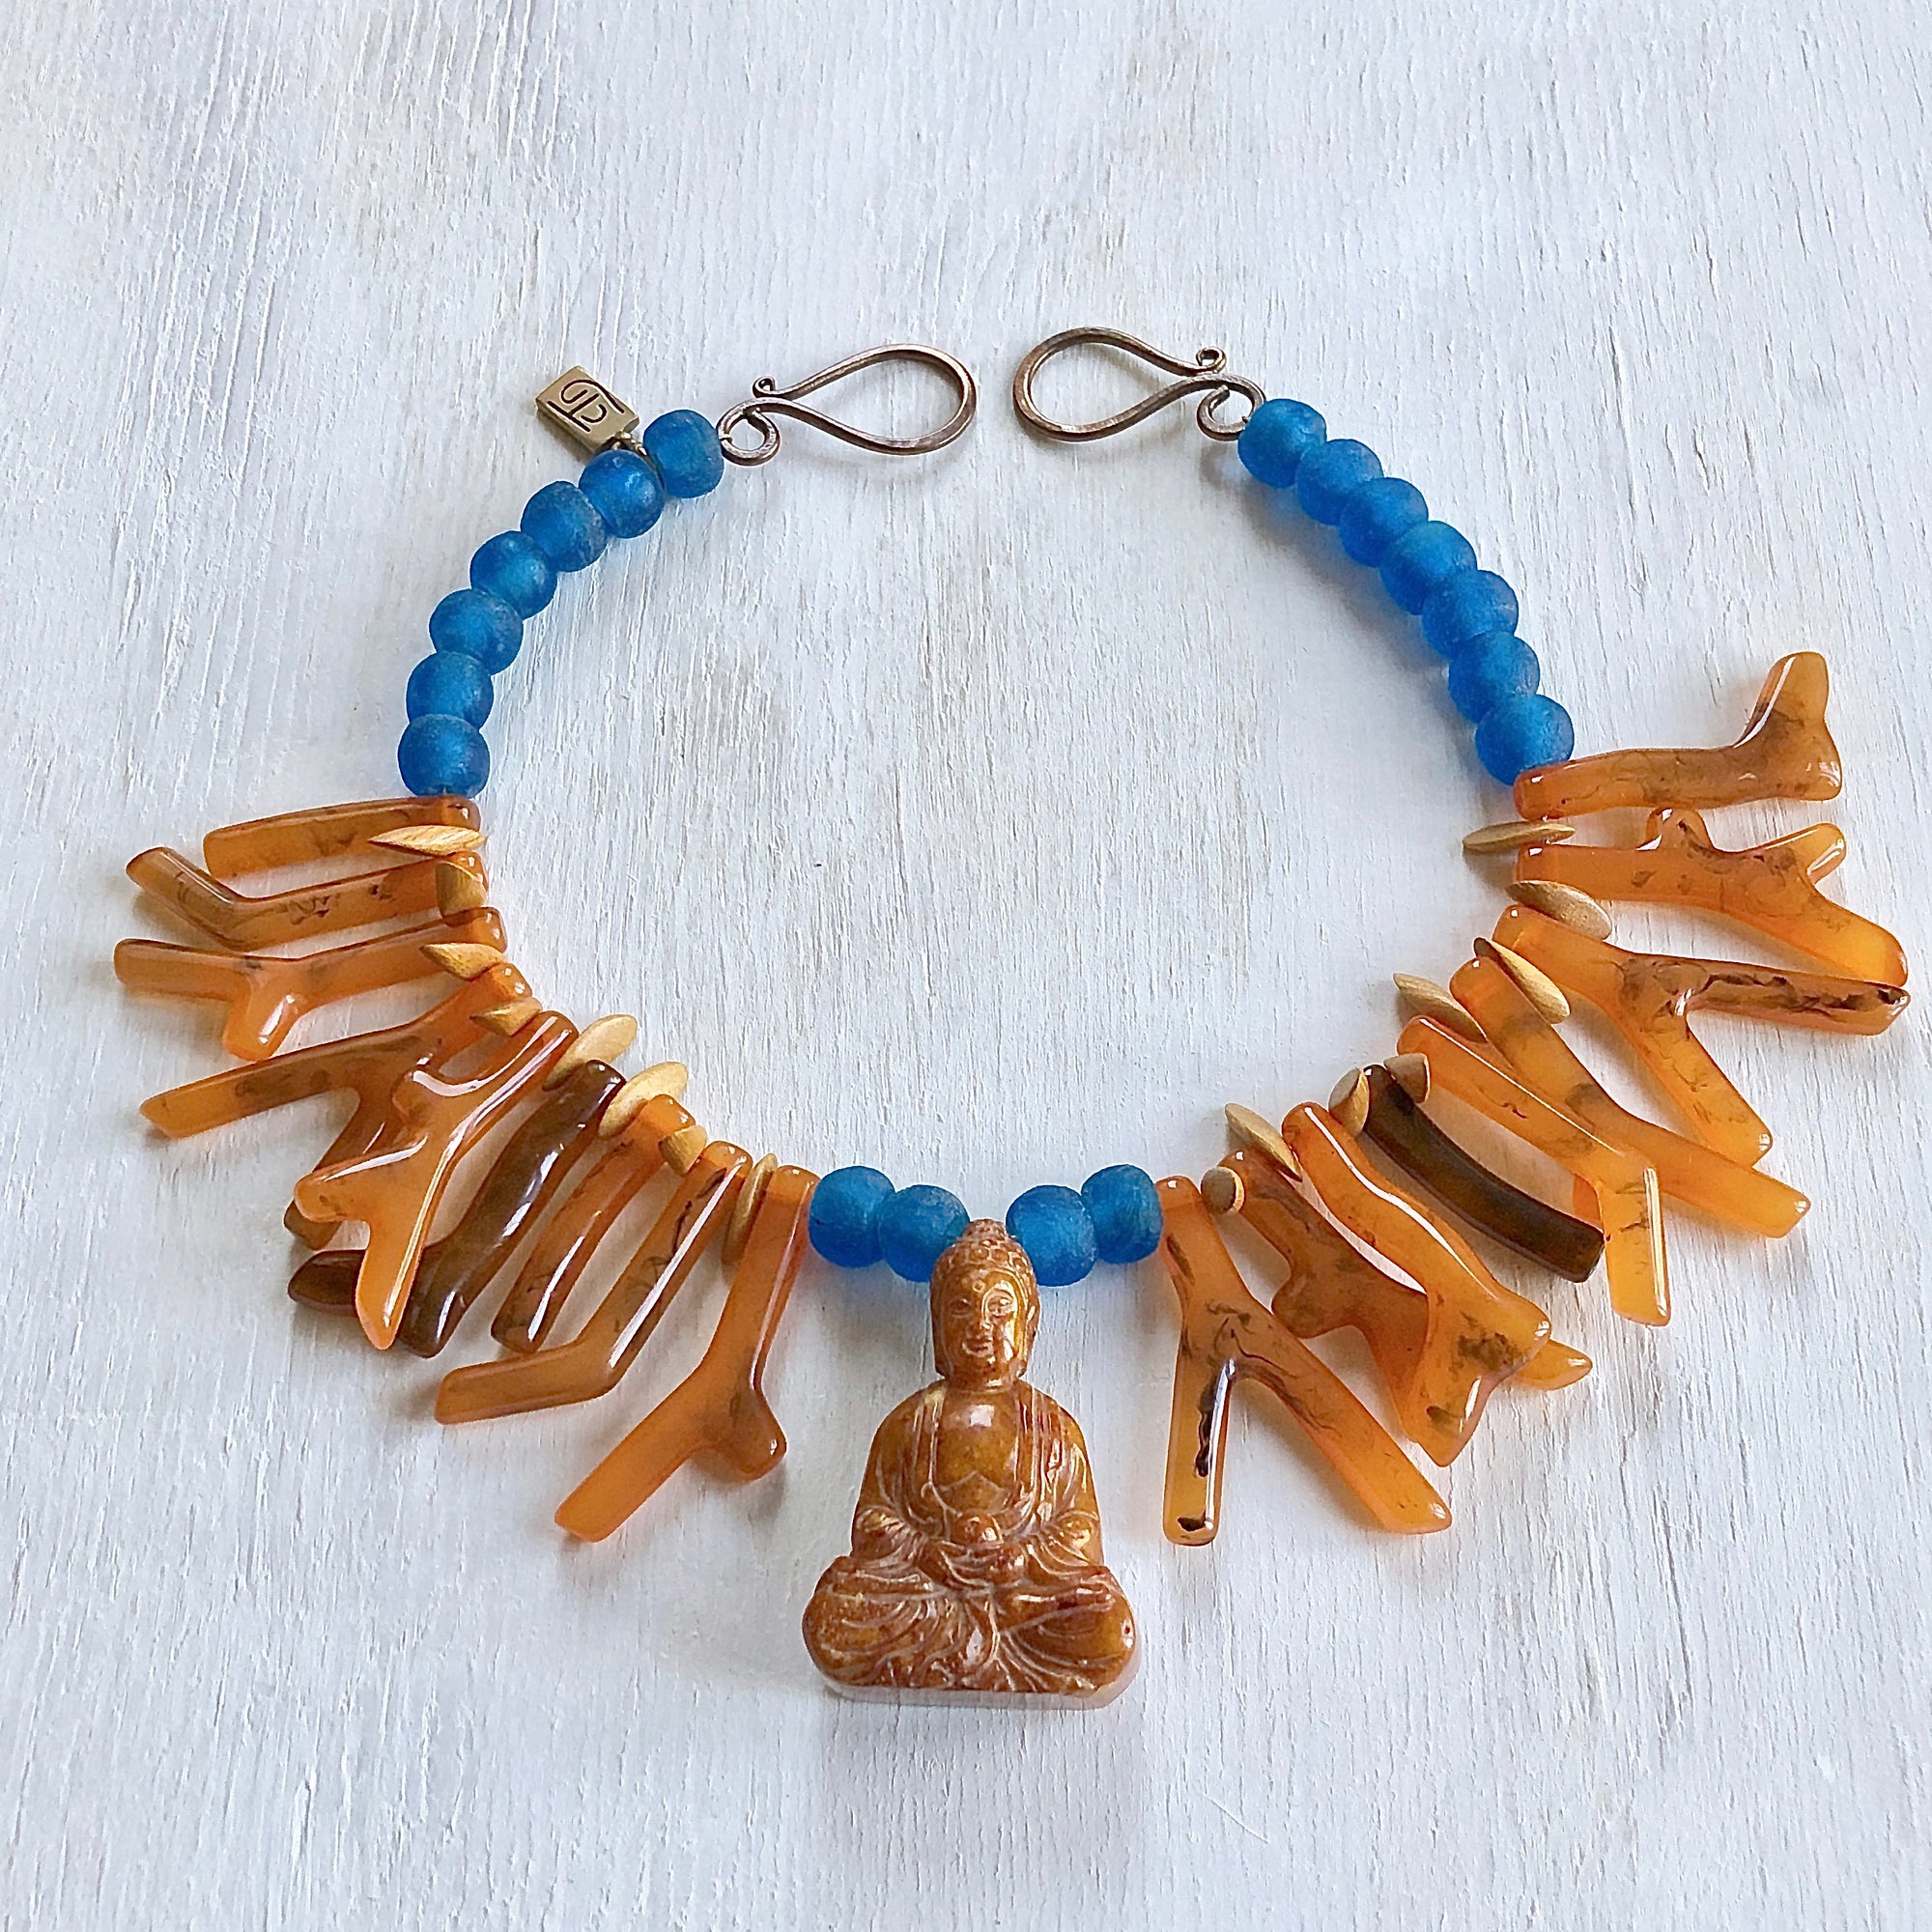 Amazon.com: Red Blue and Orange Beaded Necklace For Woman, Colorful  Handmade Ceramic Jewelry : Handmade Products